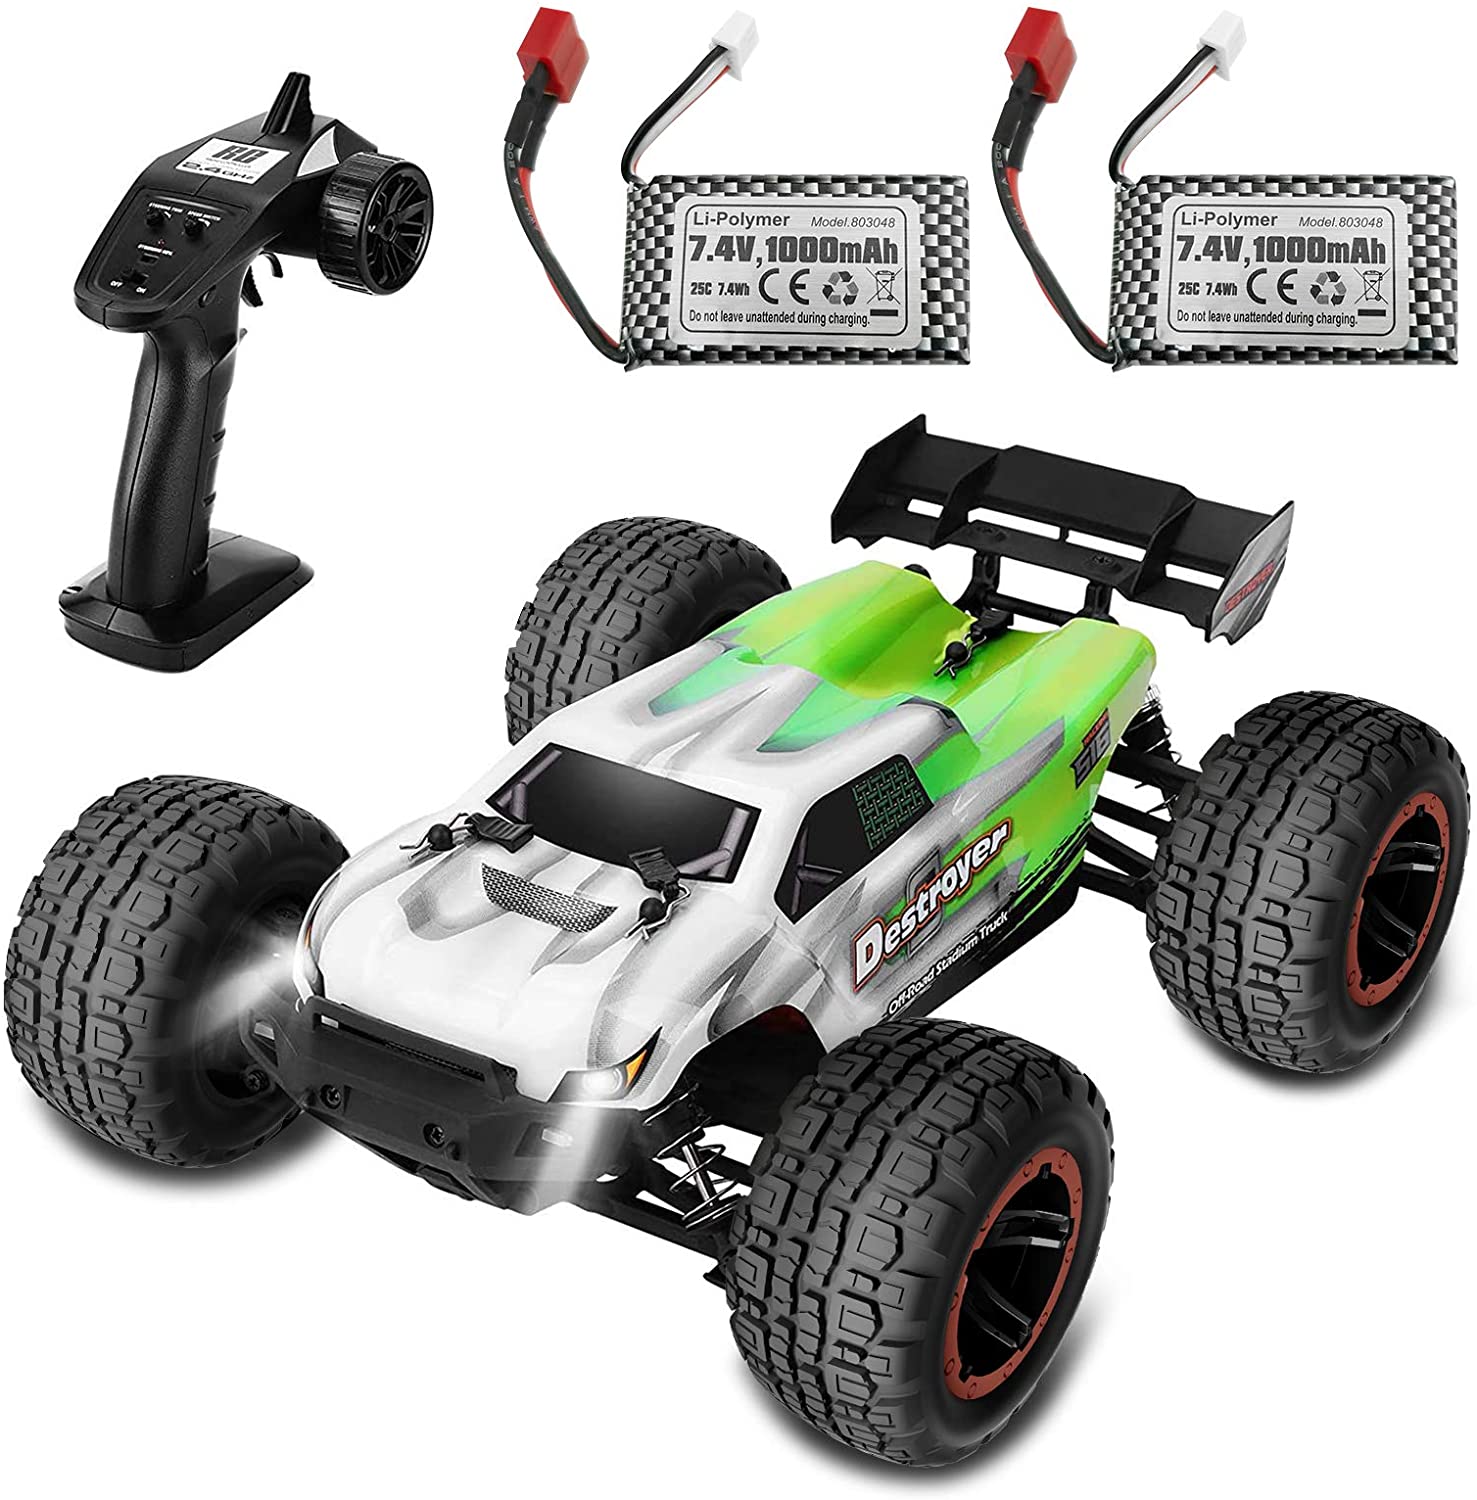 Fcoreey RC Cars, 48 km/h High Speed Remote Control Car, 1:16 Scale Rc Trucks,4WD All Terrain Monster Trucks, 2.4 Hz Off Road Racing Cars,with 2 Rechargeable Battery, Gift for Adults Boys Girls & Kids